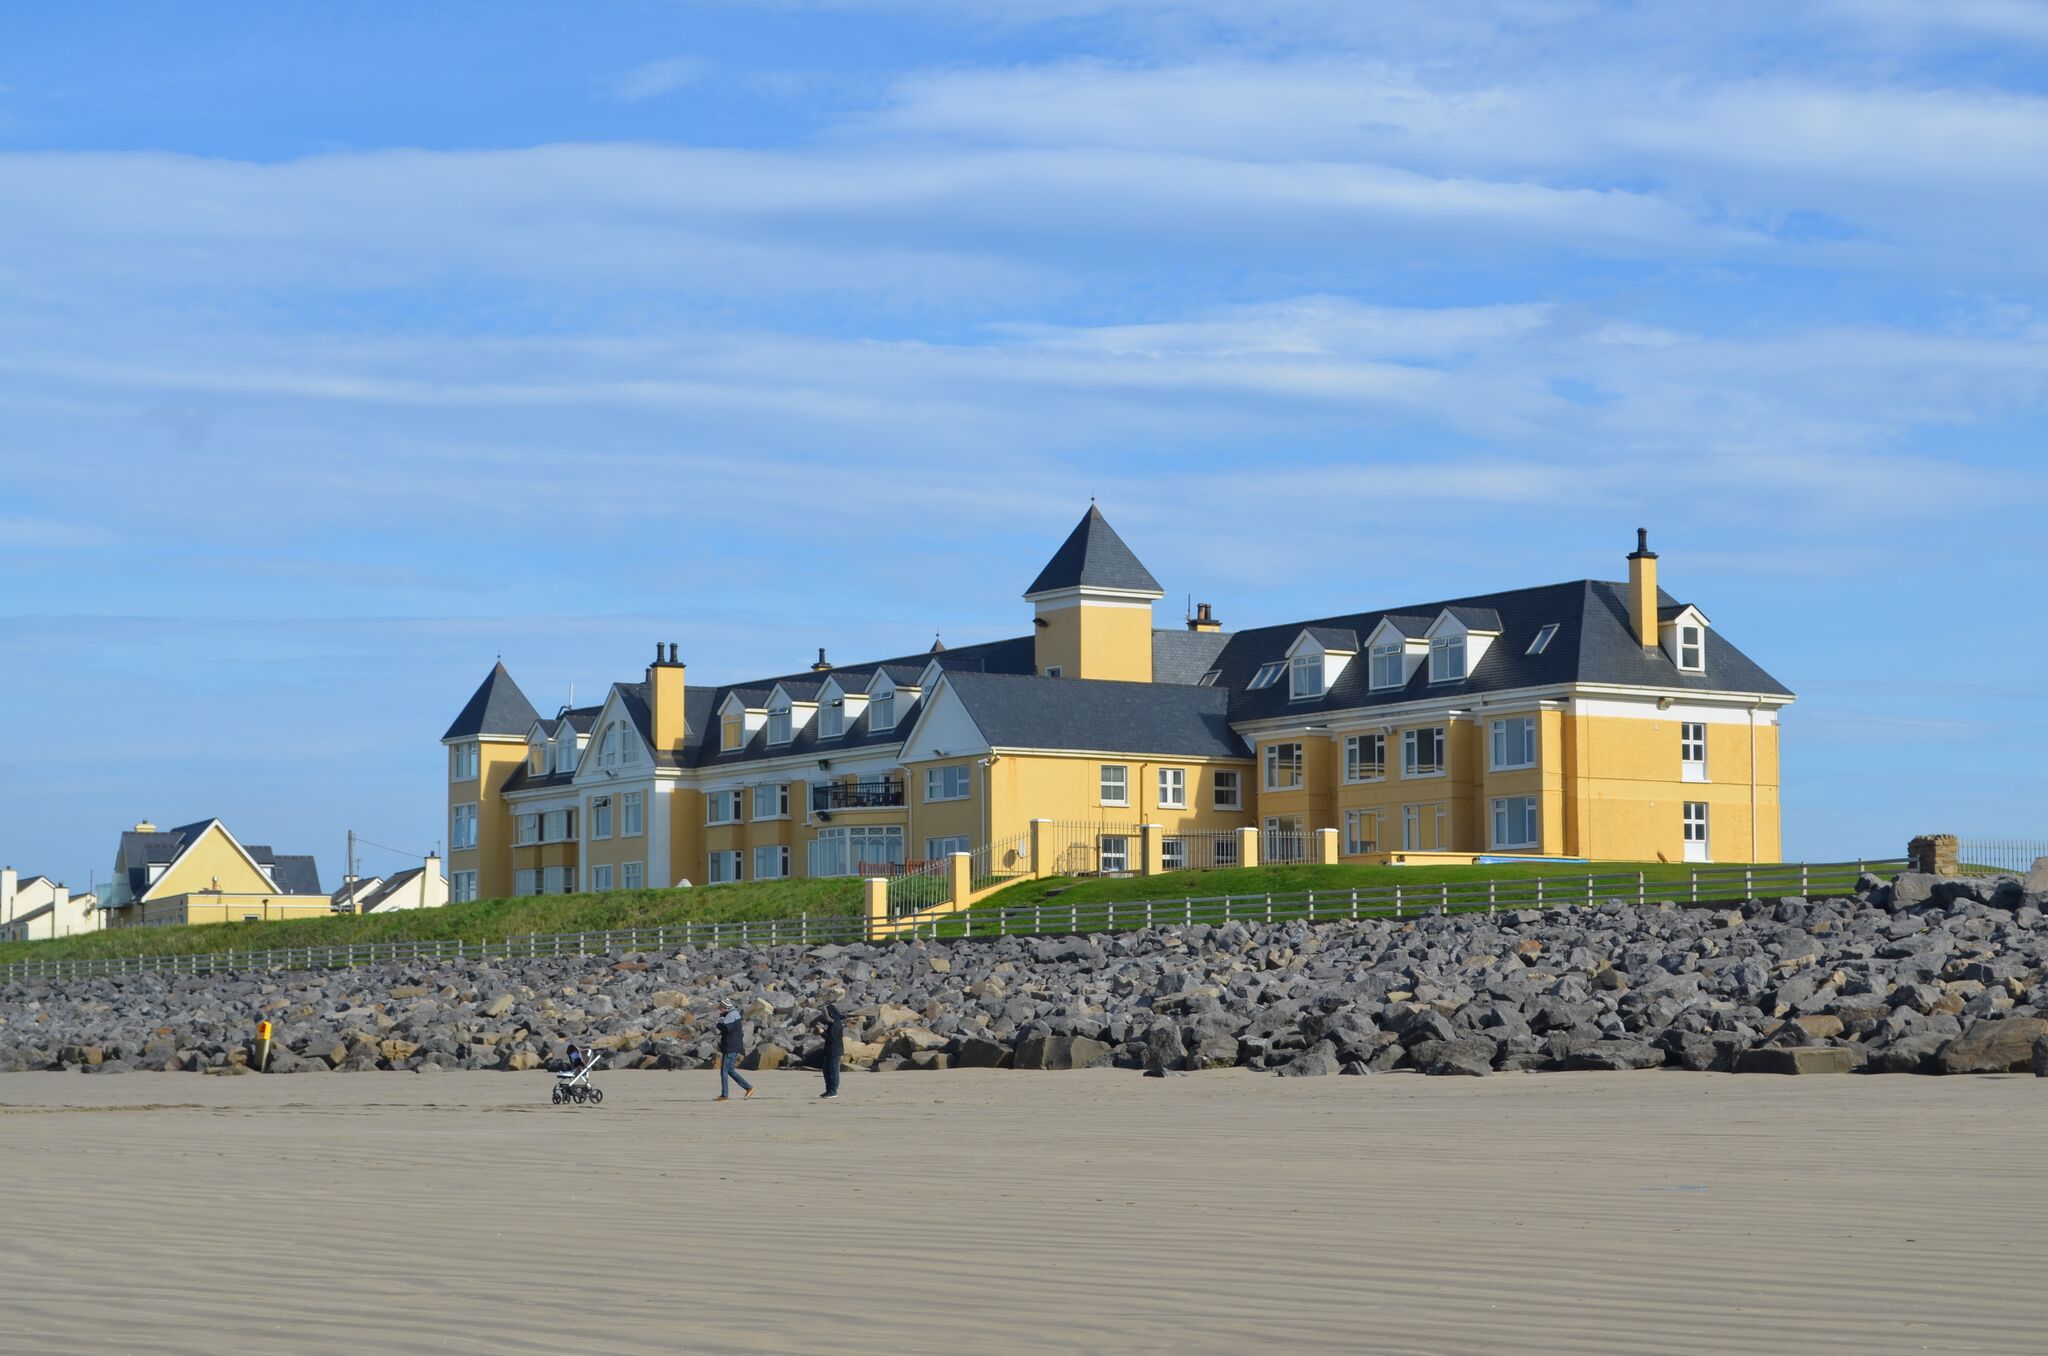 Sandhouse Hotel Rossnowlagh, Co. Donegal